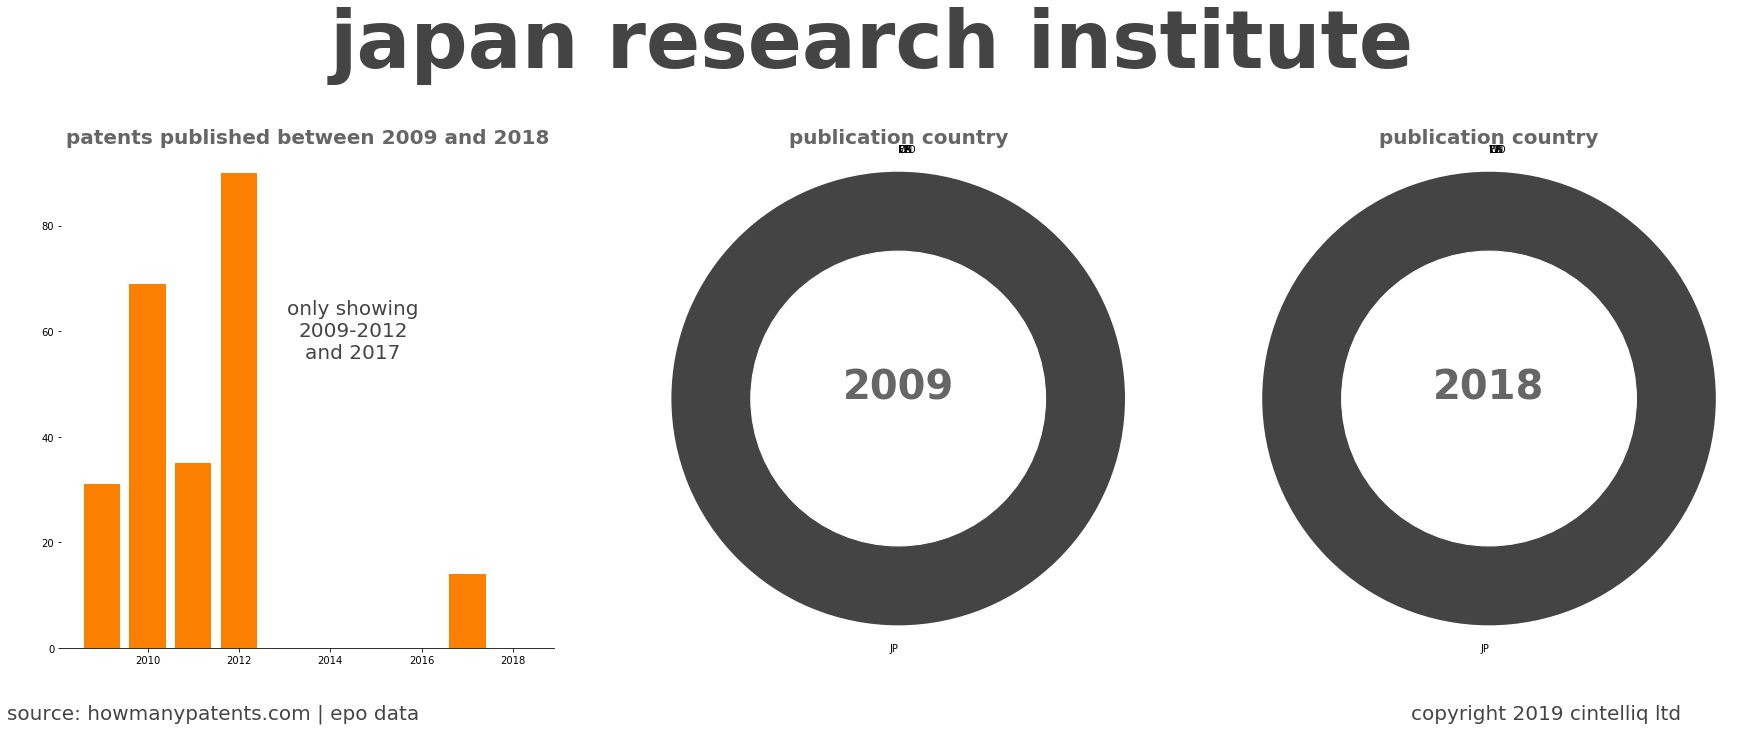 summary of patents for Japan Research Institute